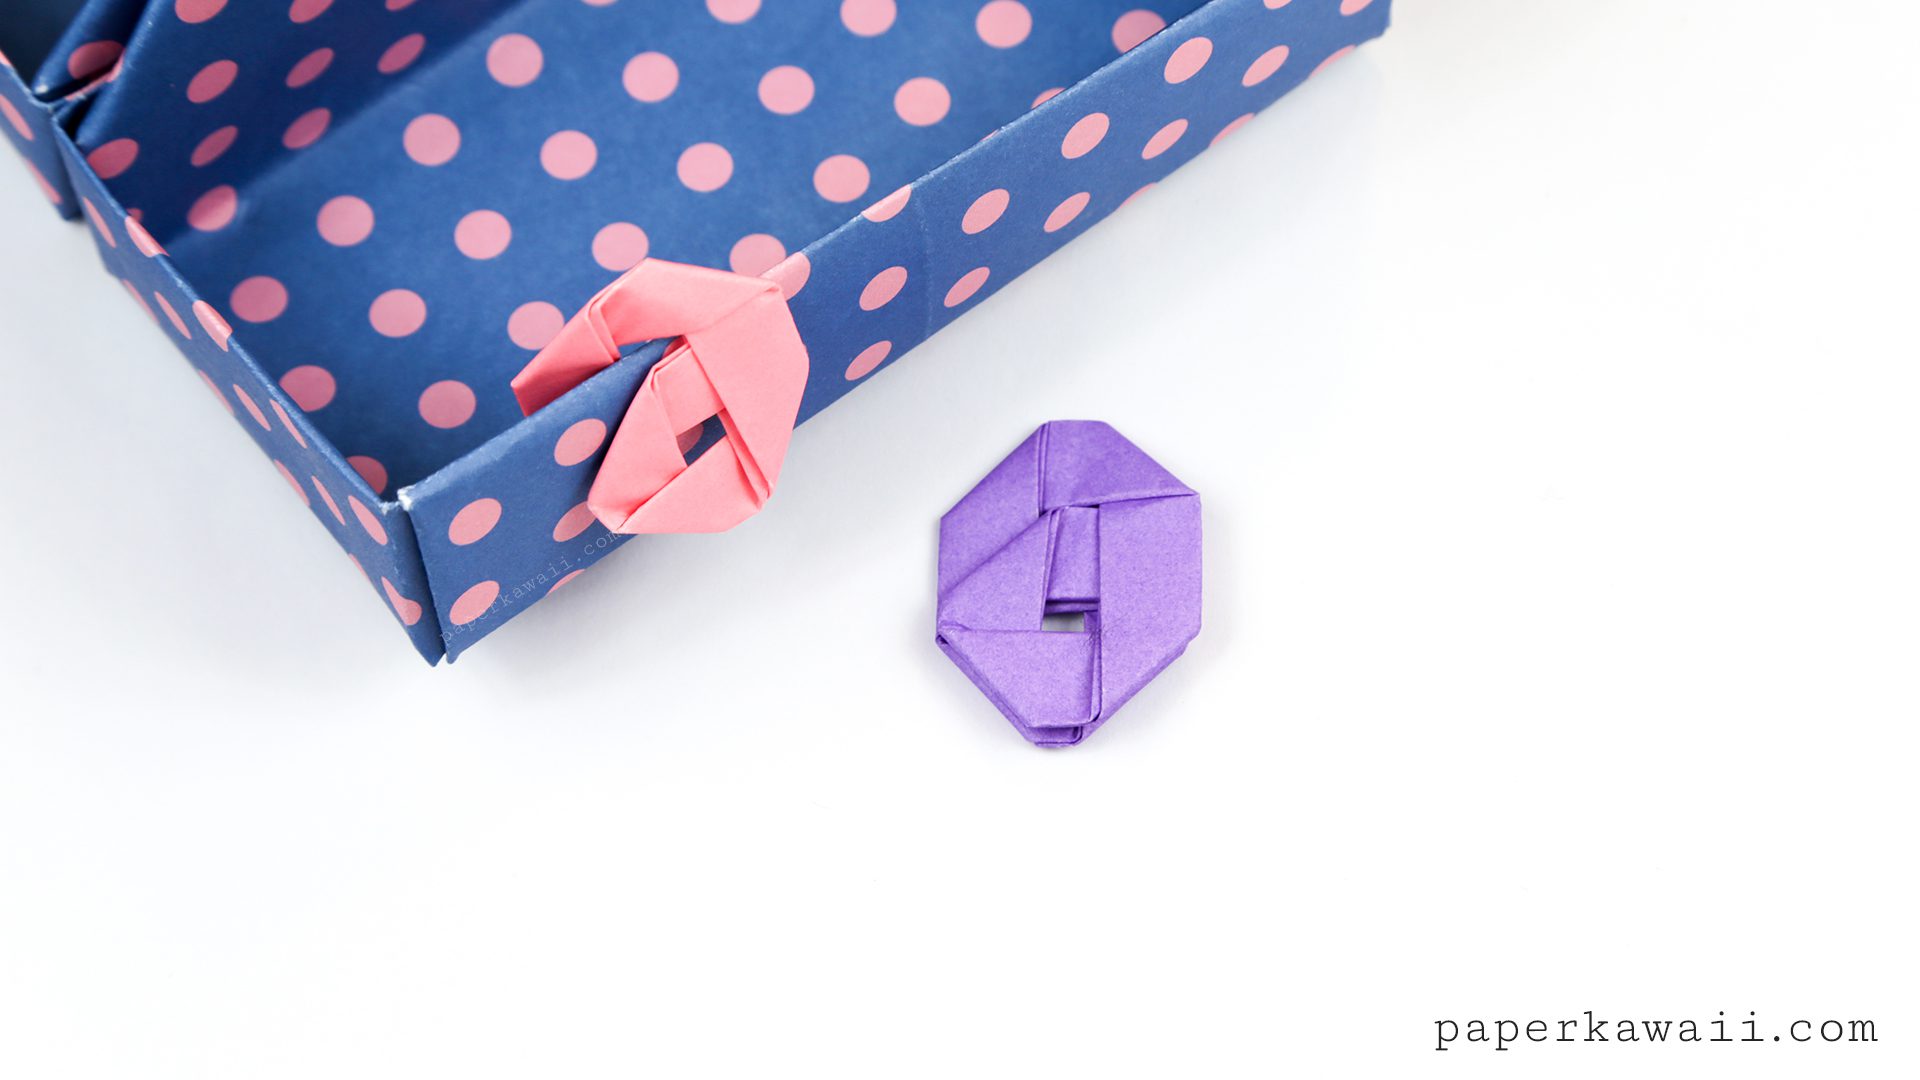 Origami Paper Clips!